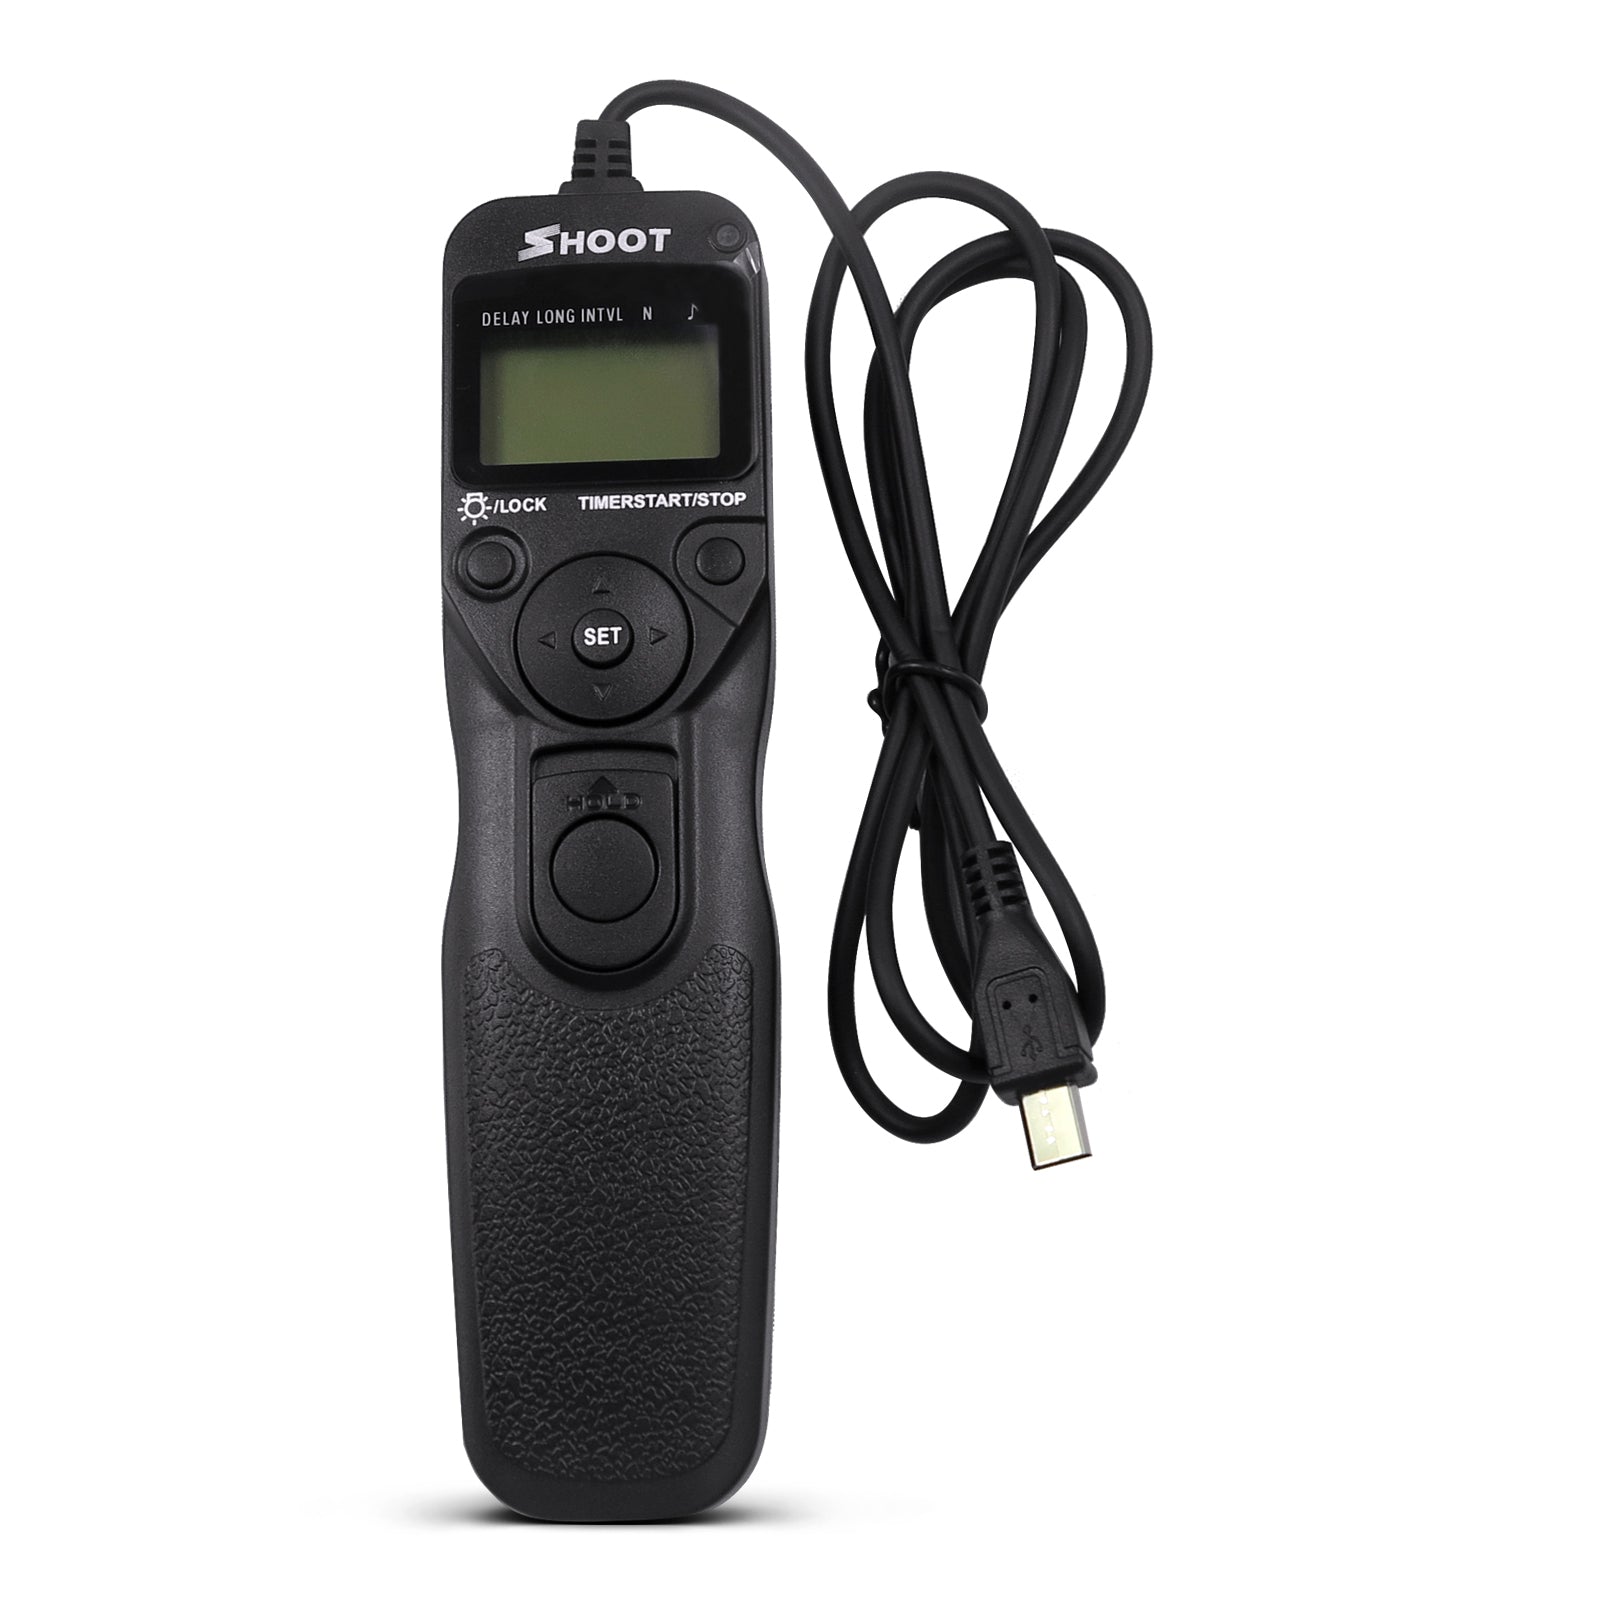 Shoot RM-VPRI LCD Timer Remote Control for Sony Alpha A7 A7R A5000 A6000 Shutter Release